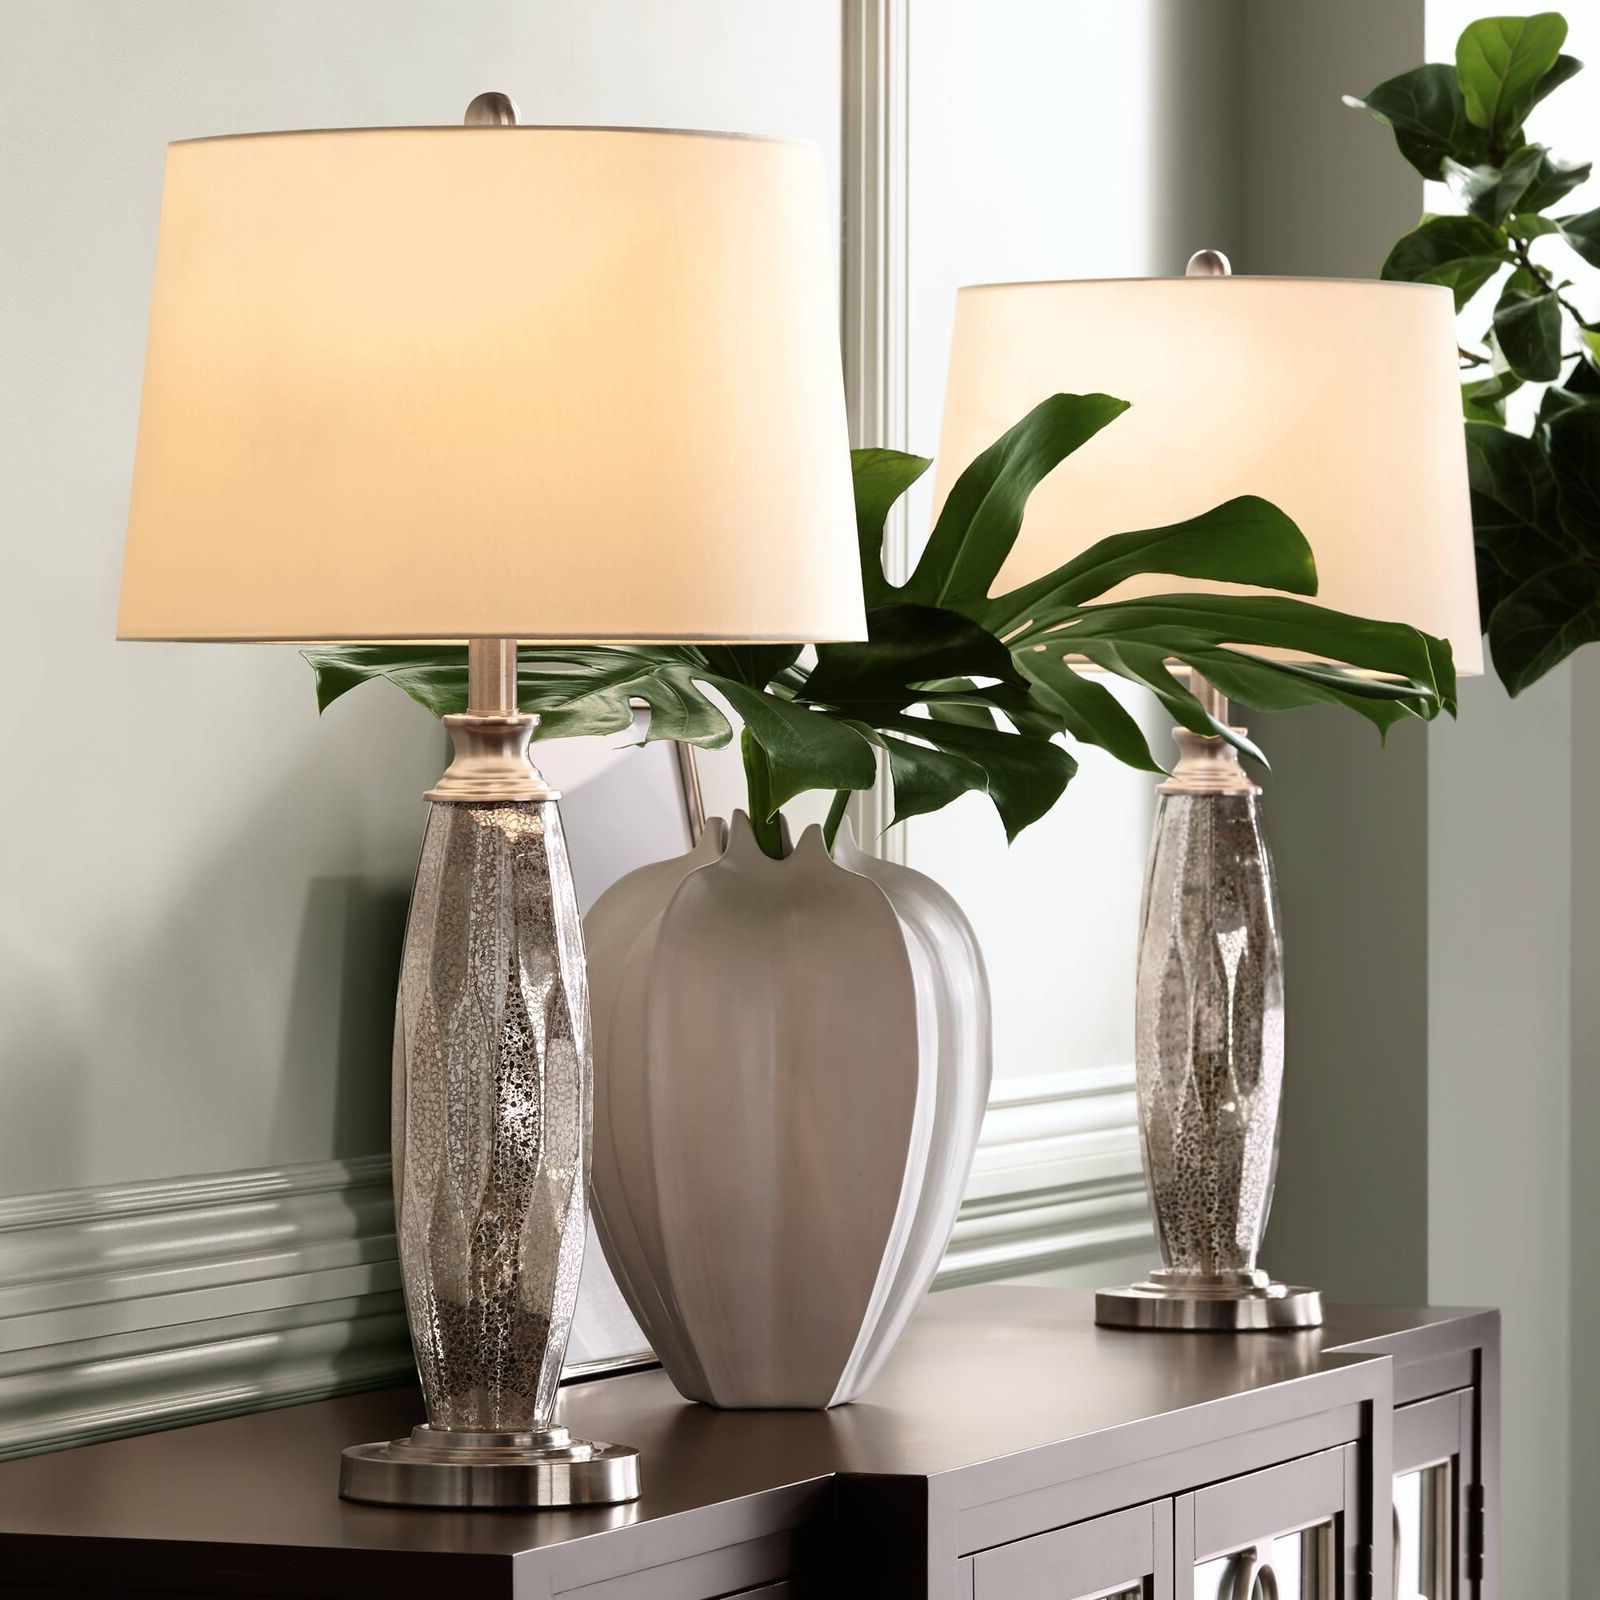 Widely Used Modern Table Lamps Set Of 2 Mercury Glass Brushed Nickel For Living Room  Bedroom (View 13 of 15)